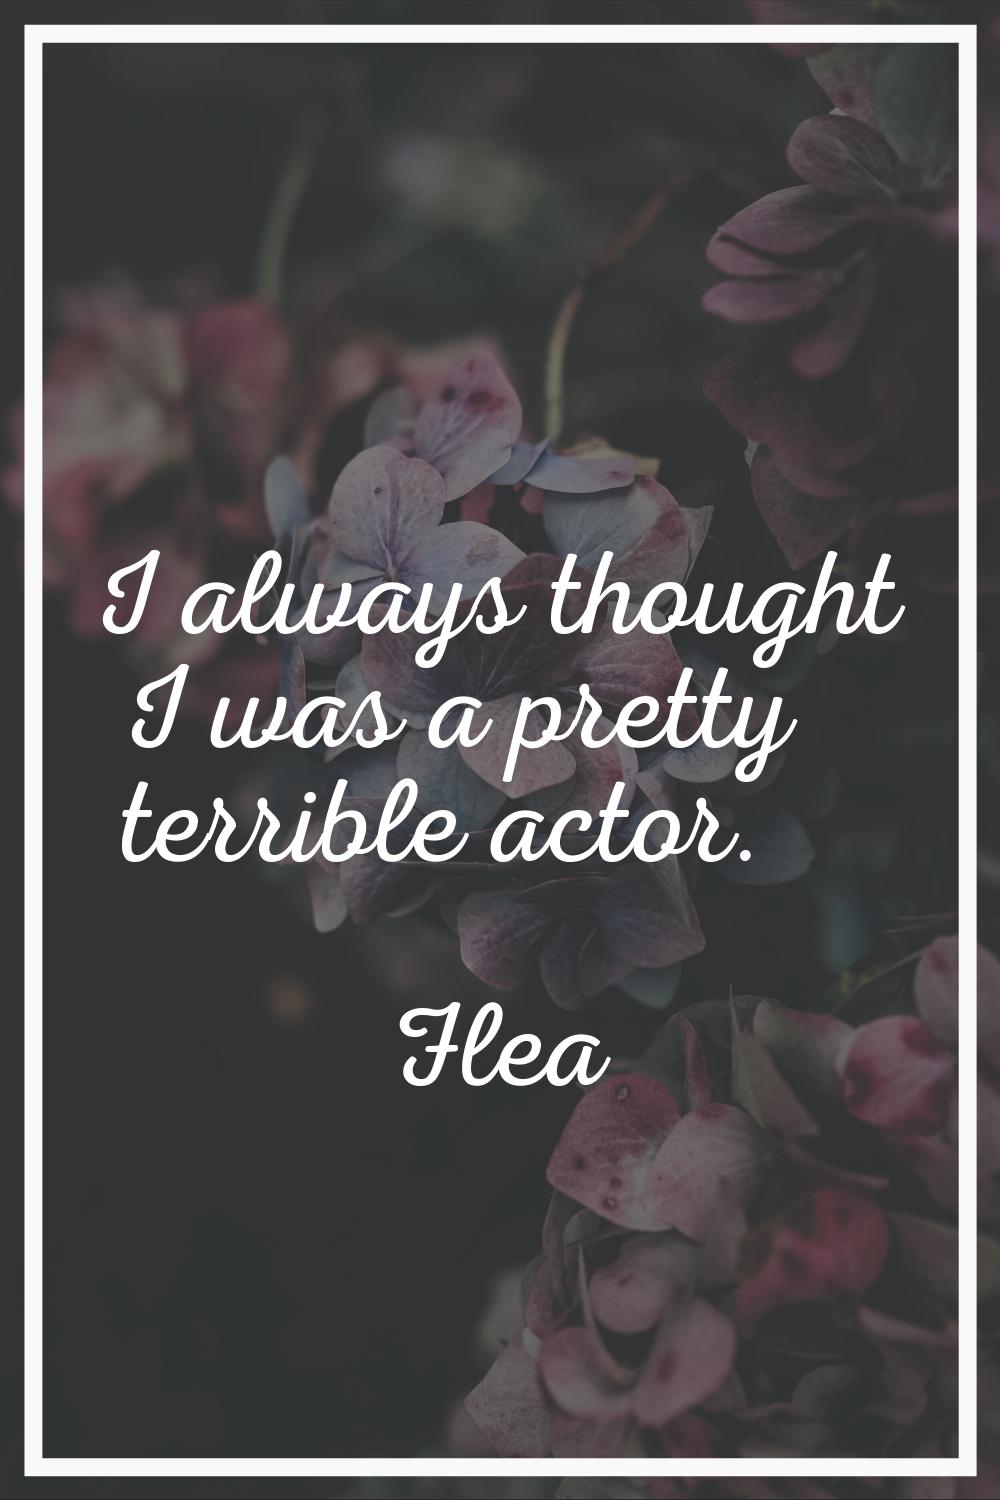 I always thought I was a pretty terrible actor.